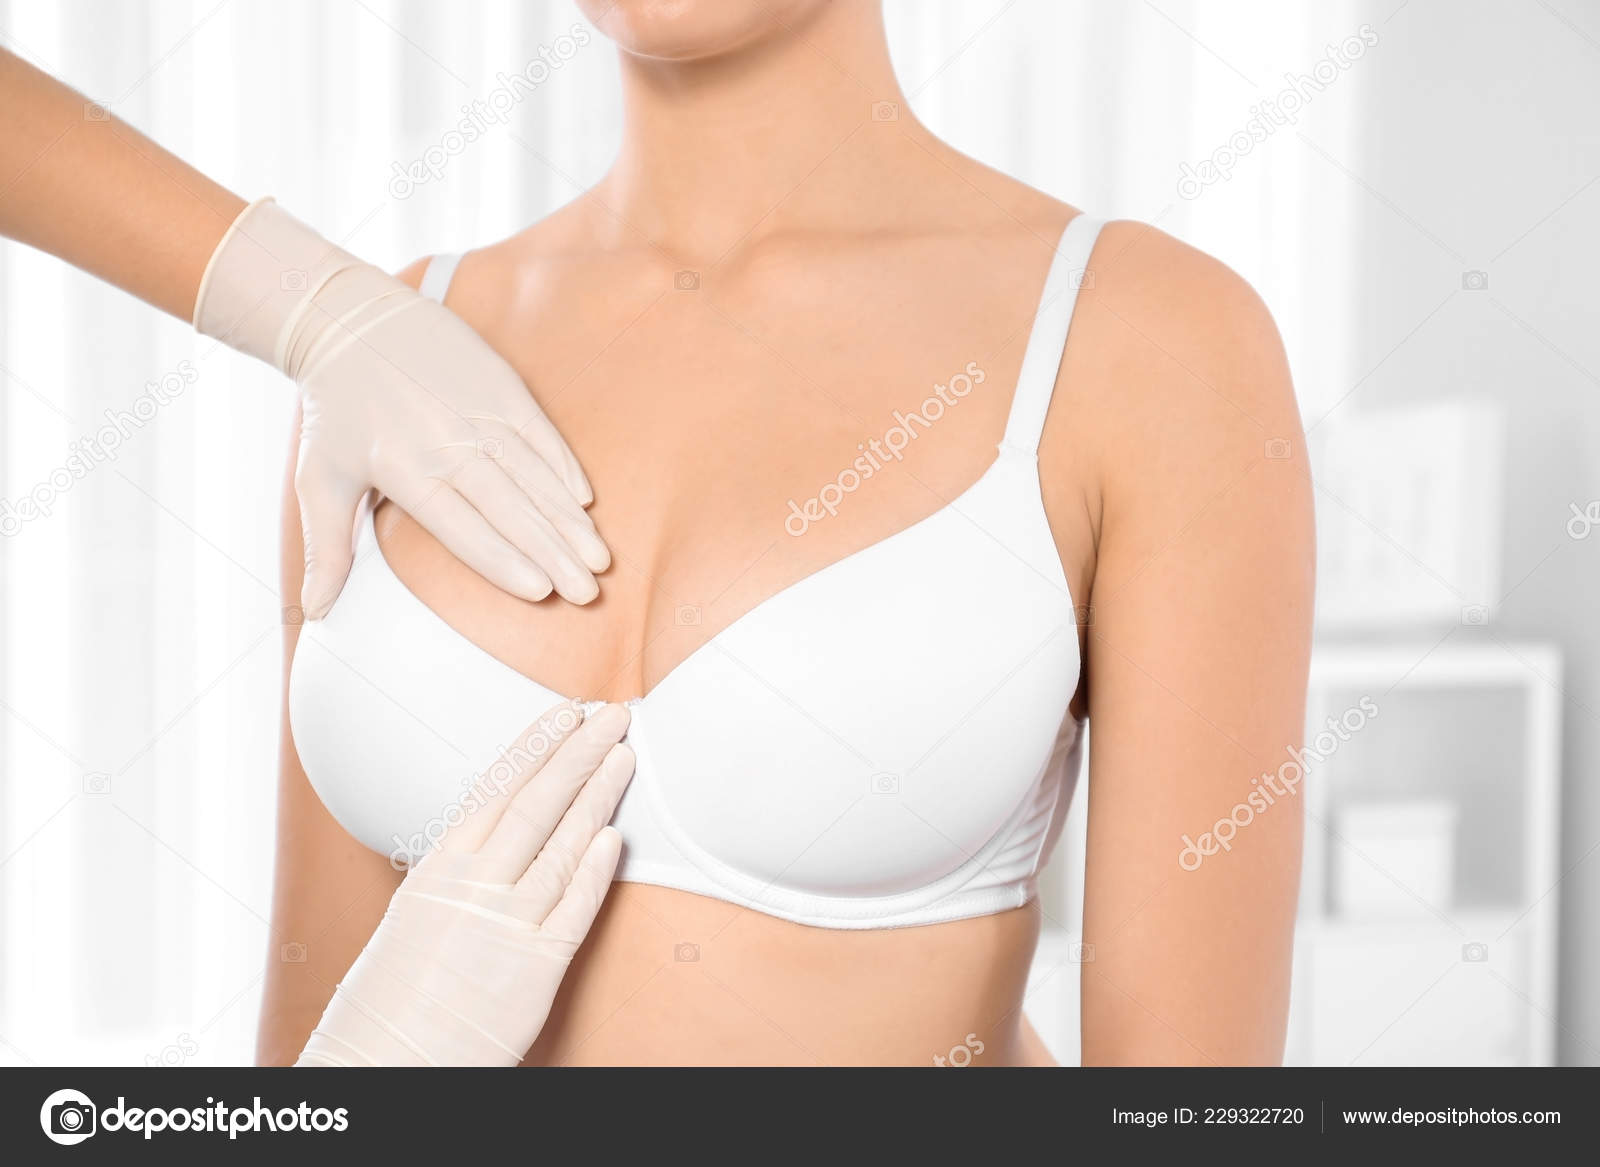 Girl direct on her breast. stock image. Image of healthy - 108089321